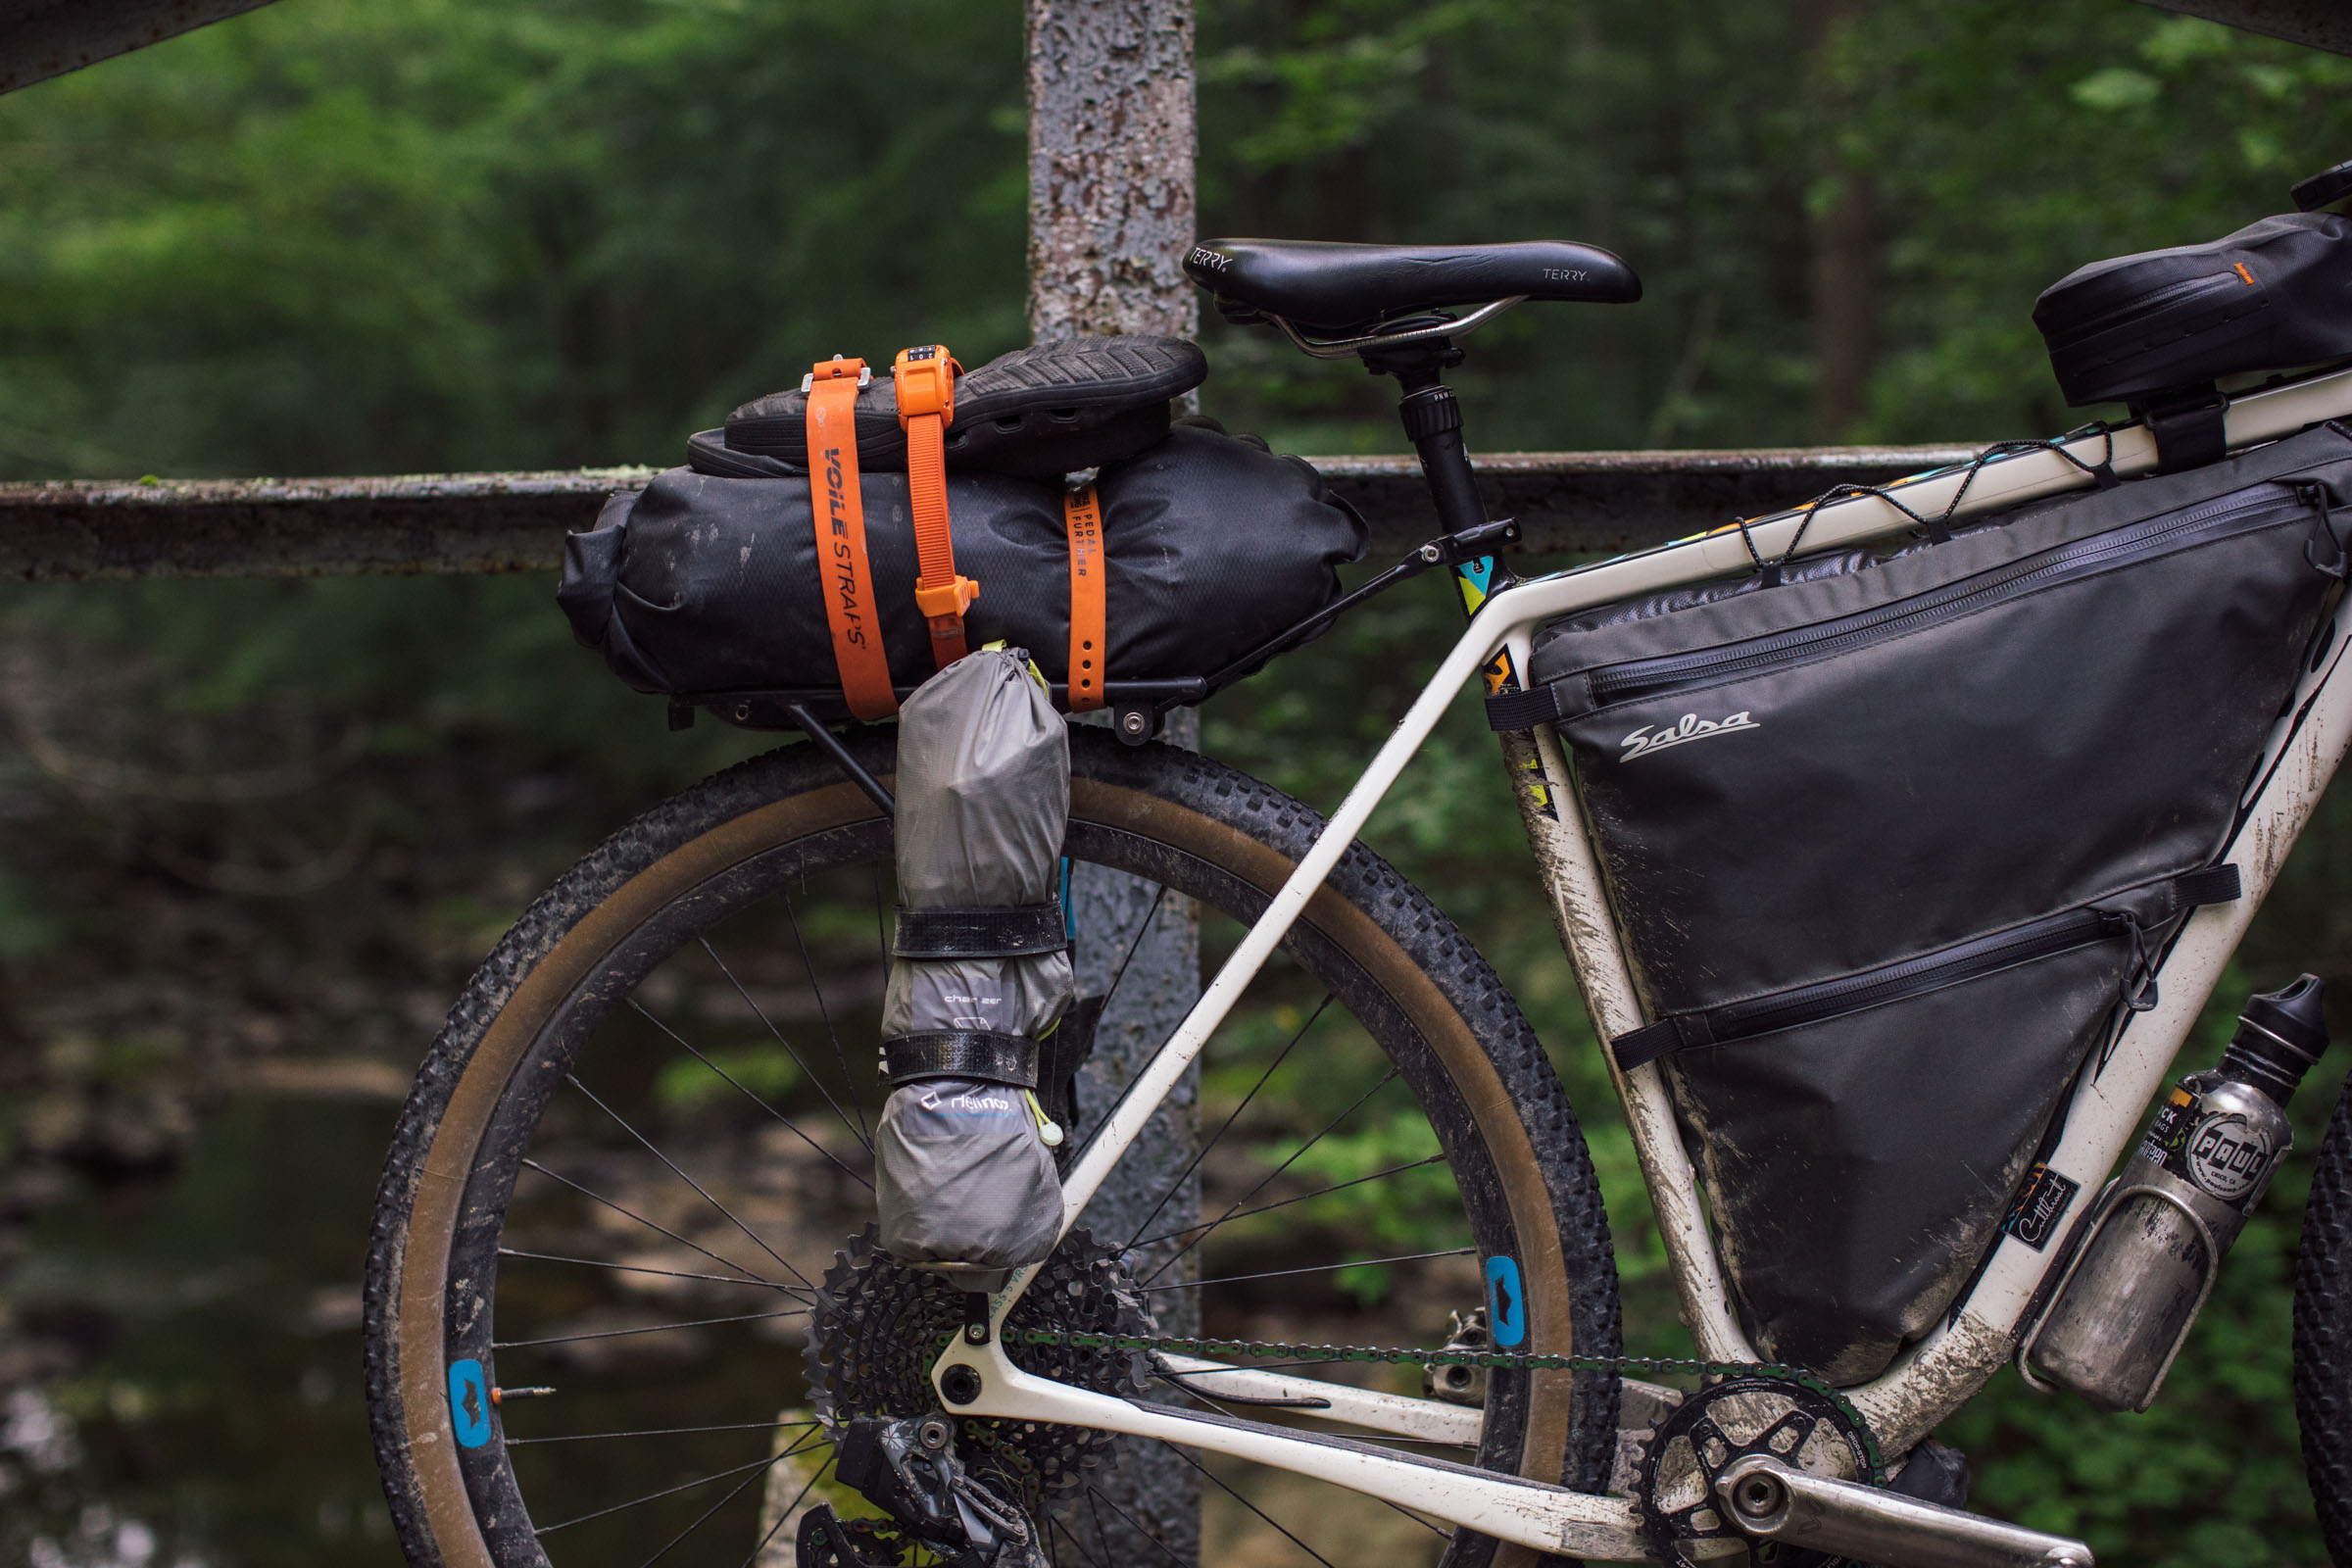 Surly 8 Pack Rack and 24 Pack Rack Safety Recall Hardware Request